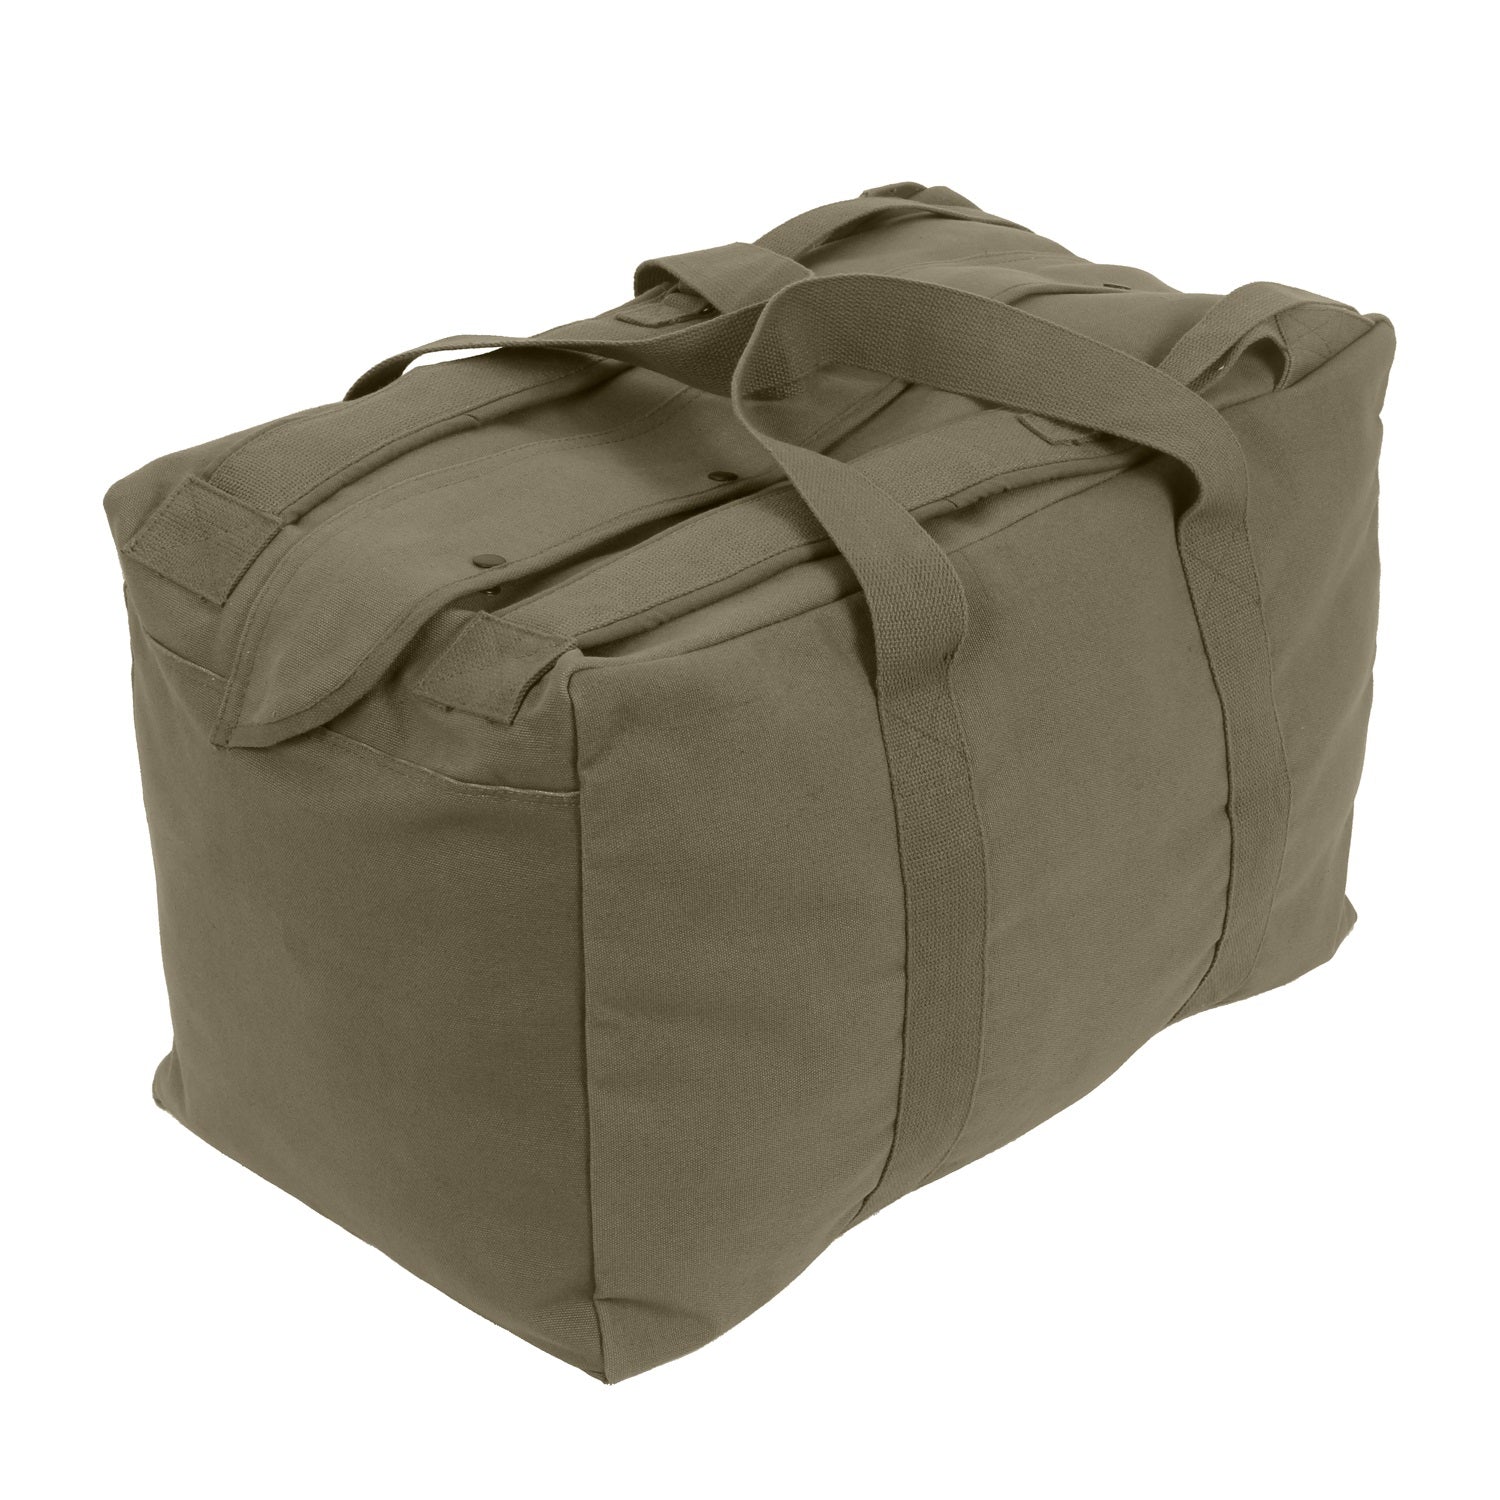 Rothco Mossad Type Tactical Canvas Cargo Bag / Backpack Olive Drab